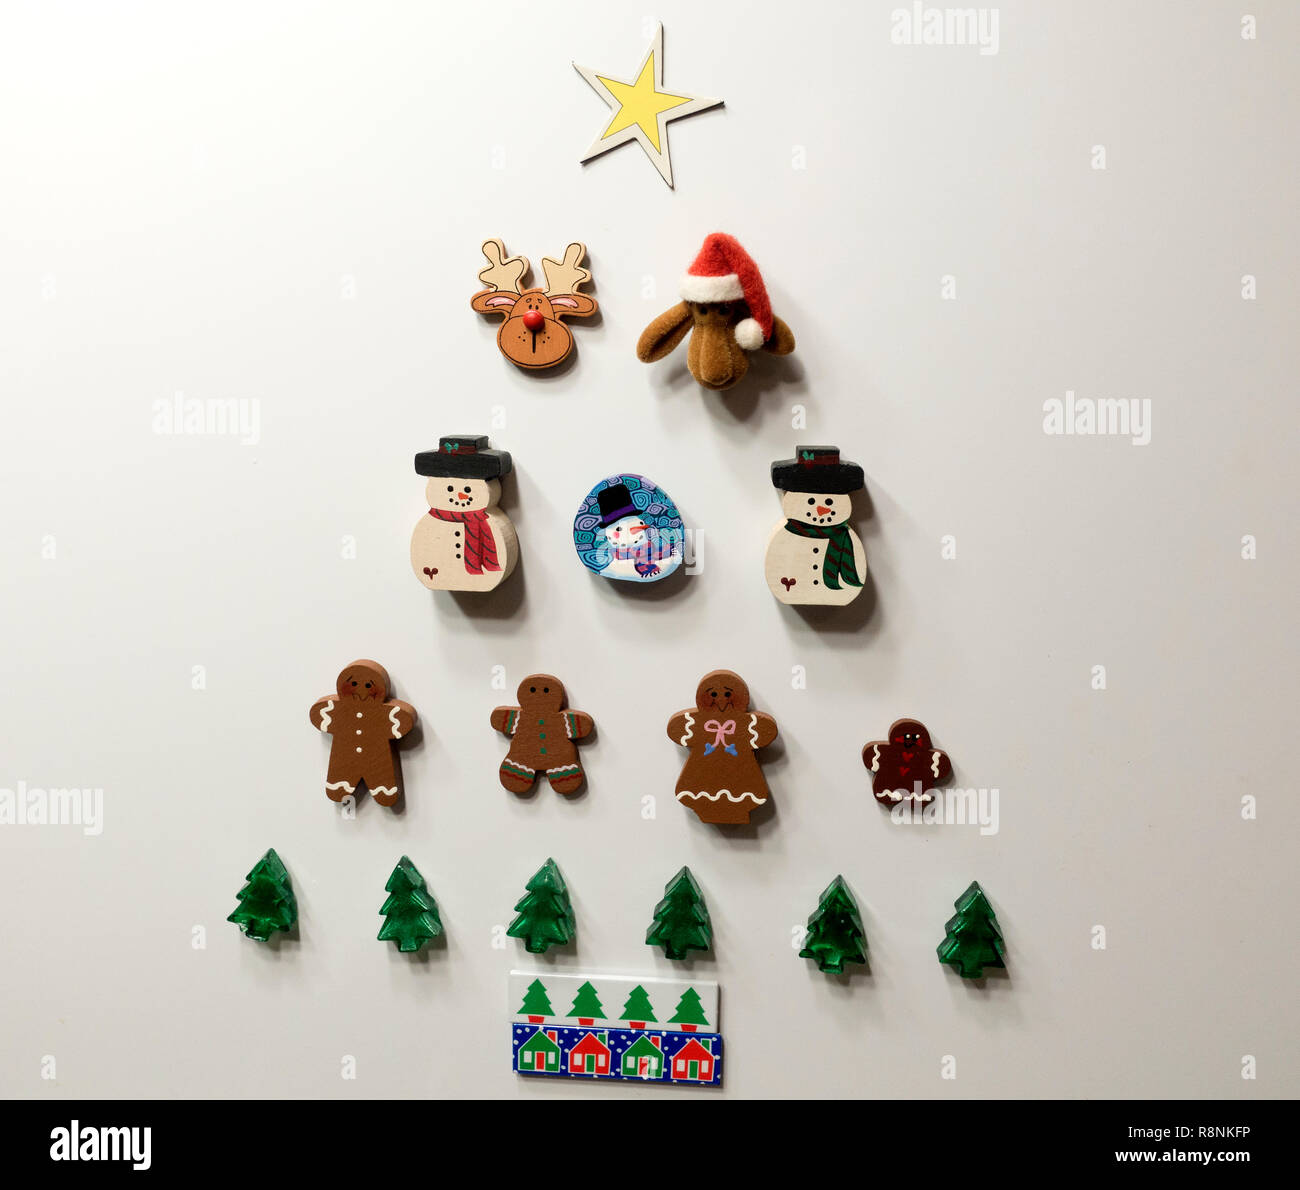 Cute miniature Christmas decorations hung on the wall in the form of a  Christmas tree. St Paul Minnesota MN USA Stock Photo - Alamy